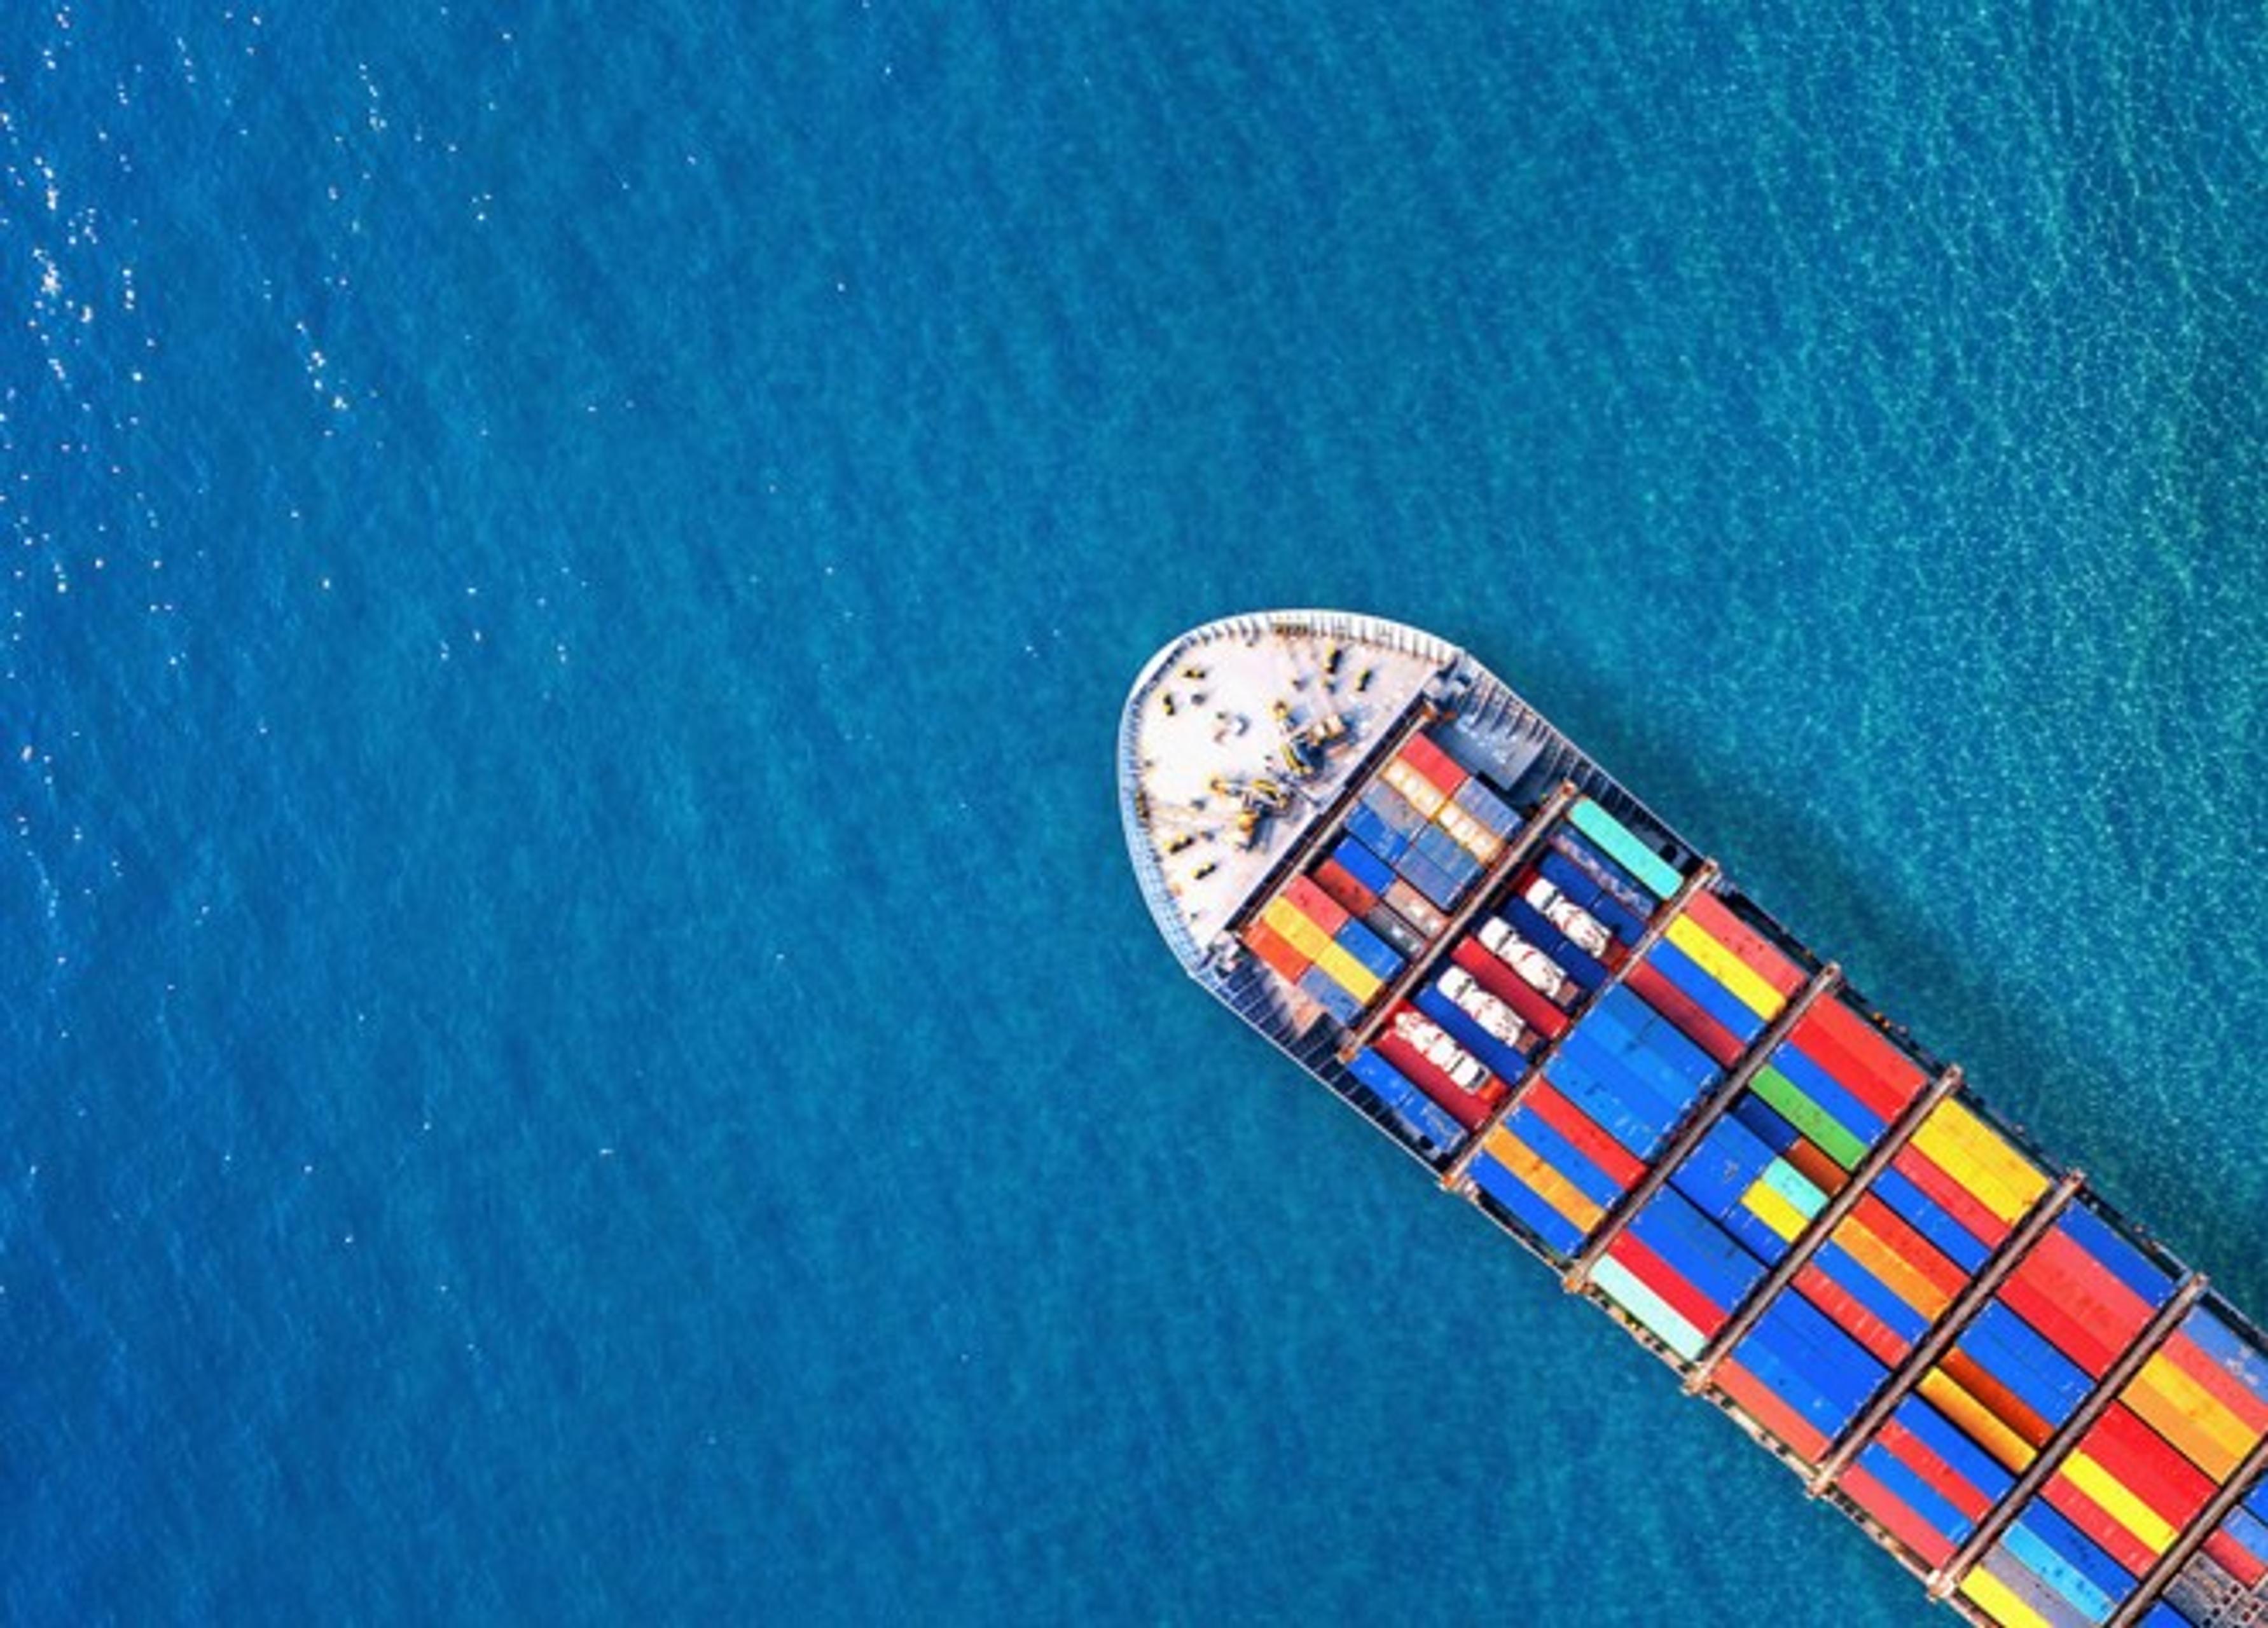 Container ship in ocean seen from above